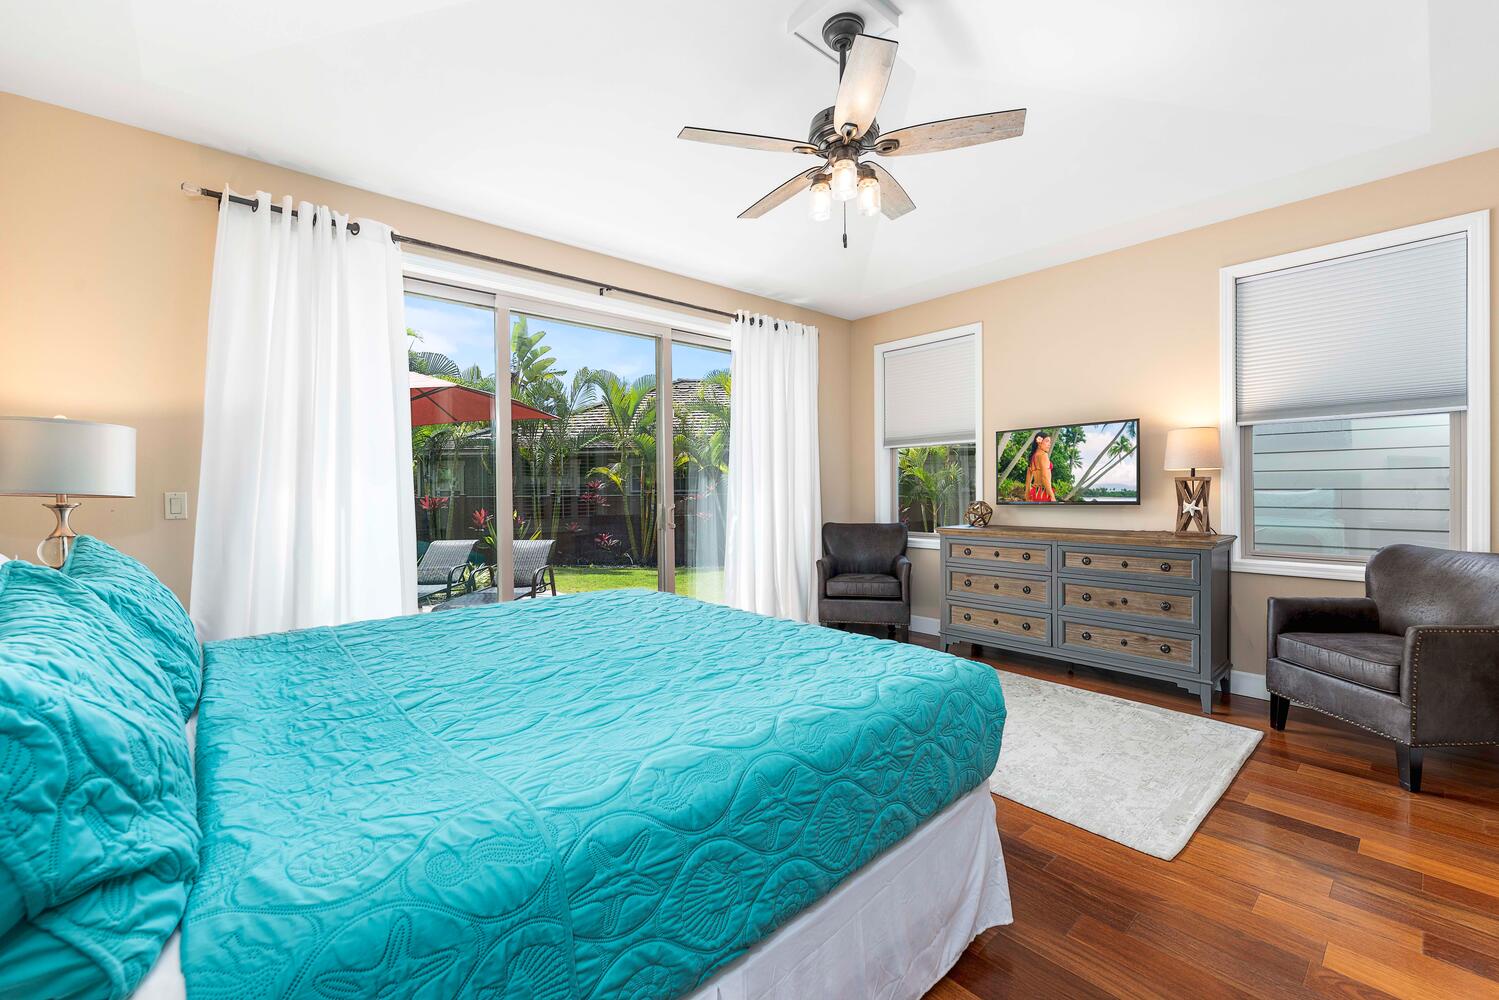 Kailua Kona Vacation Rentals, Holua Kai #32 - The primary suite has smart TV for you not to miss your favorite show